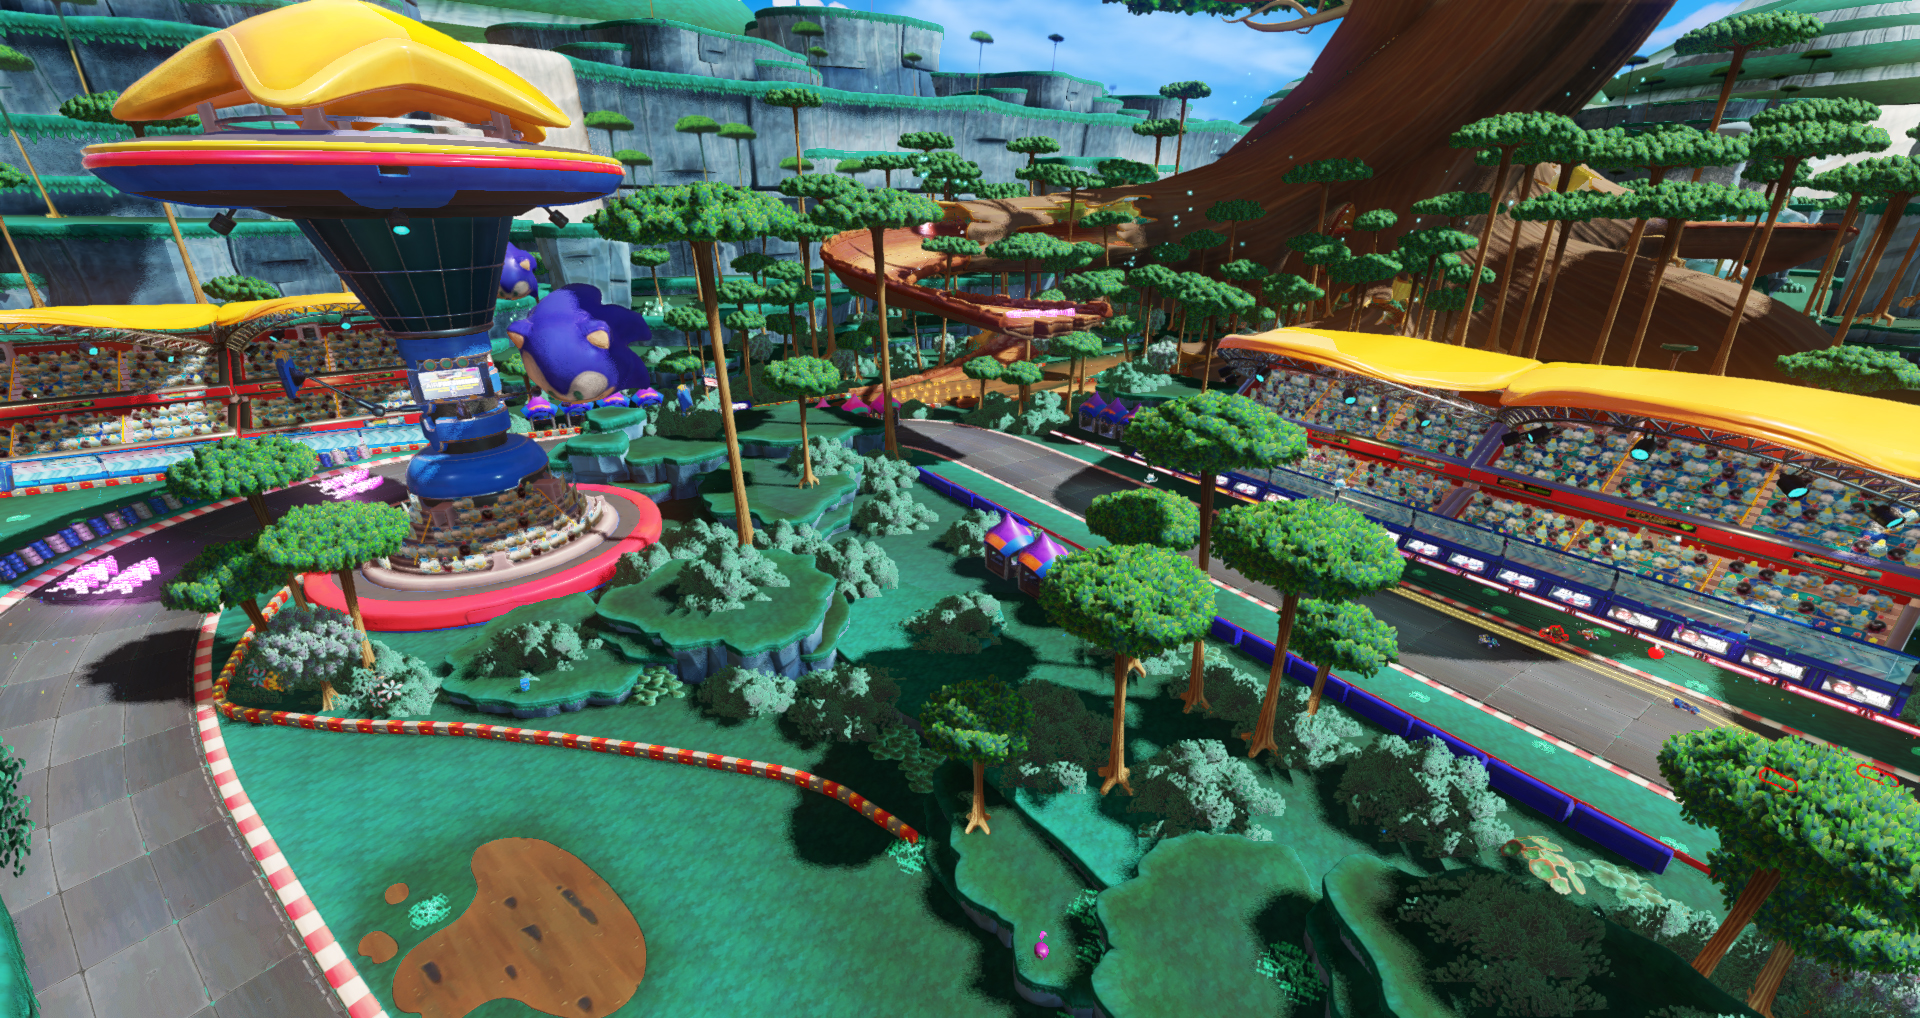 https://vignette.wikia.nocookie.net/sonic/images/0/0b/Team_Sonic_Racing_screen_10.jpg/revision/latest?cb=20190523211009